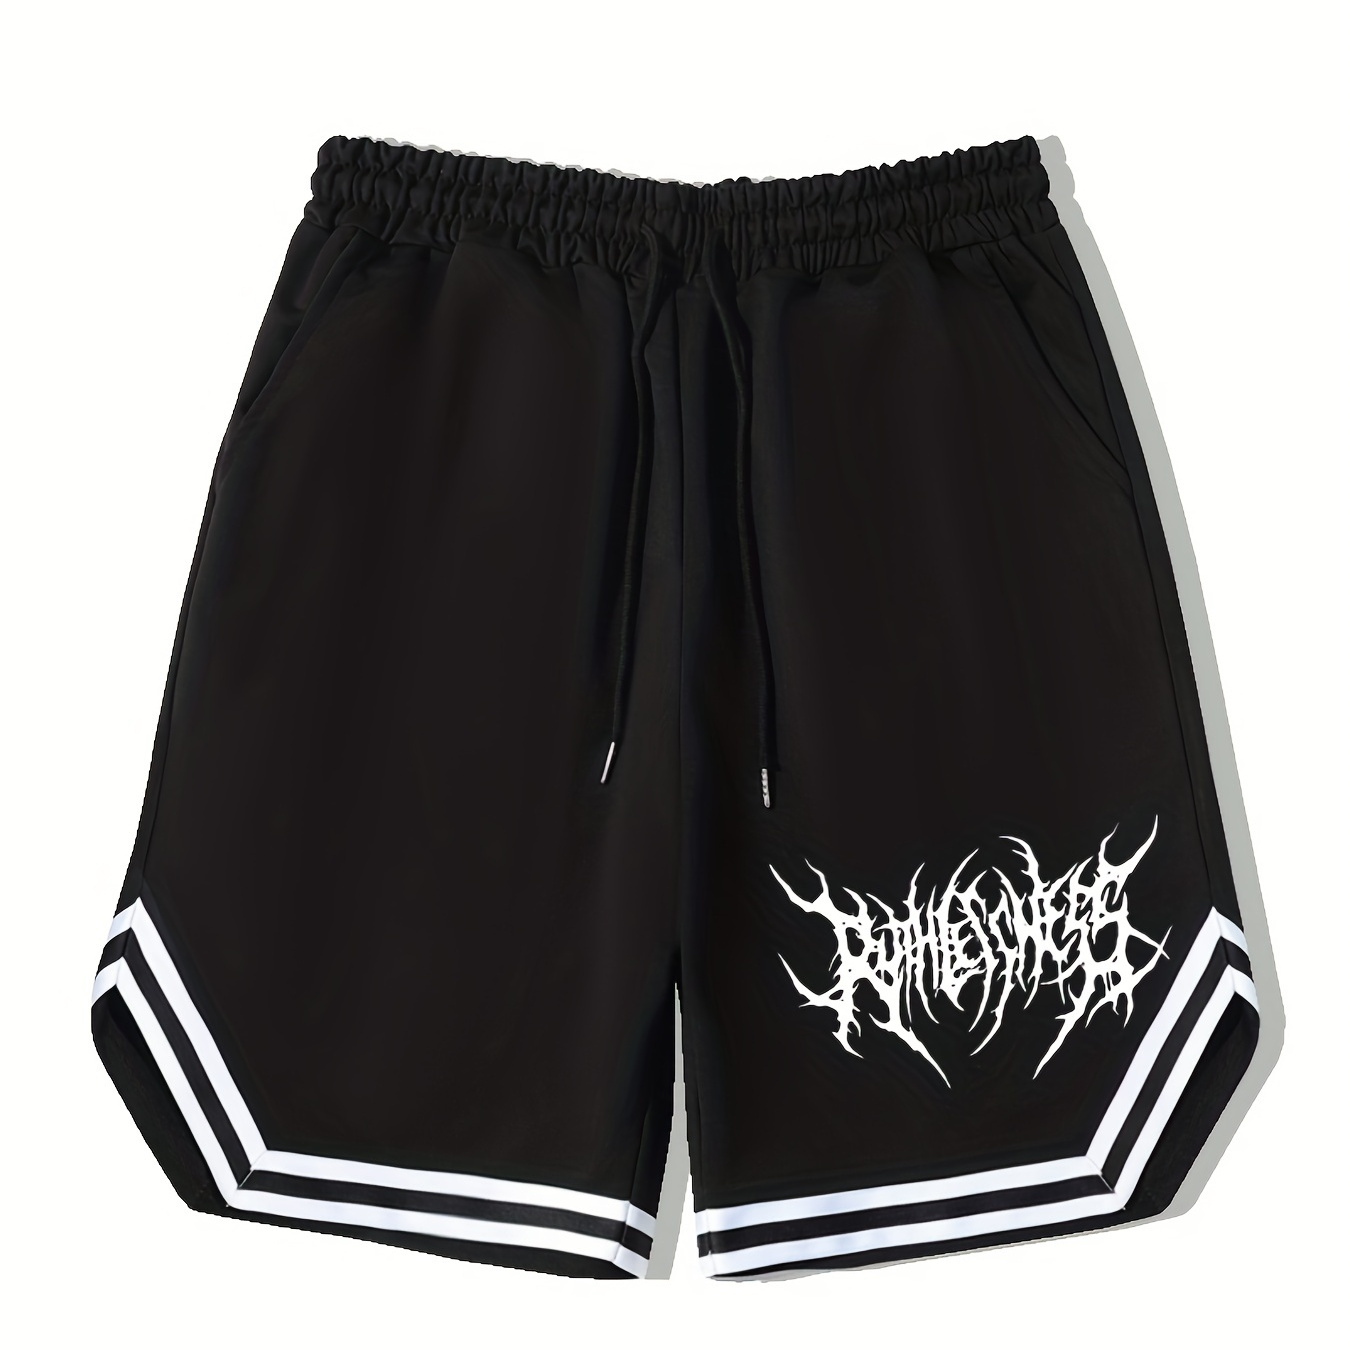 

Shorts for men with urban style, featuring graphic designs and stretchy drawstring waist for comfort and casual chic look. Perfect for men's summer fashion outfits.